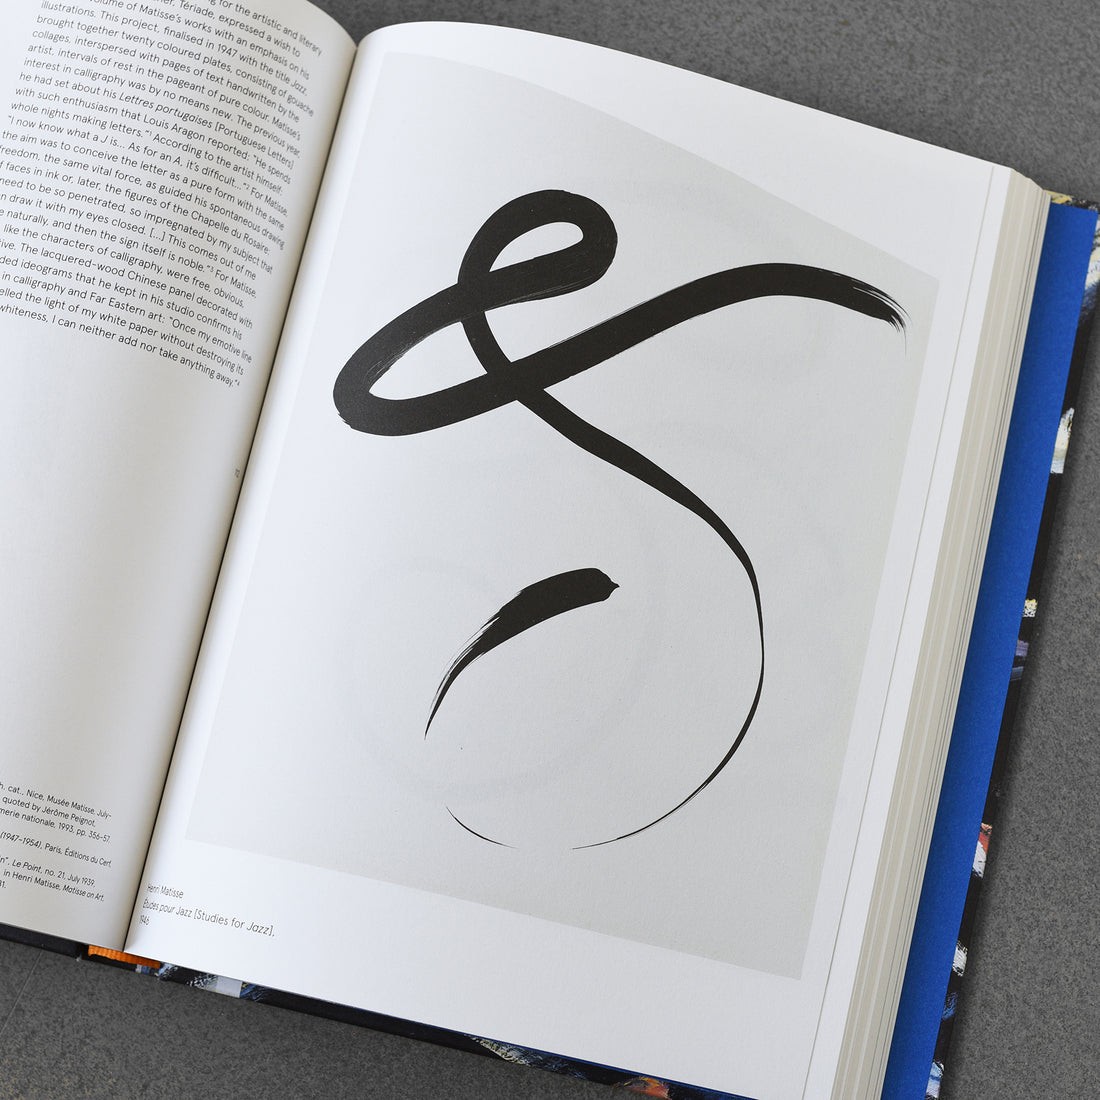 Abstraction and Calligraphy : Towards a Universal Language